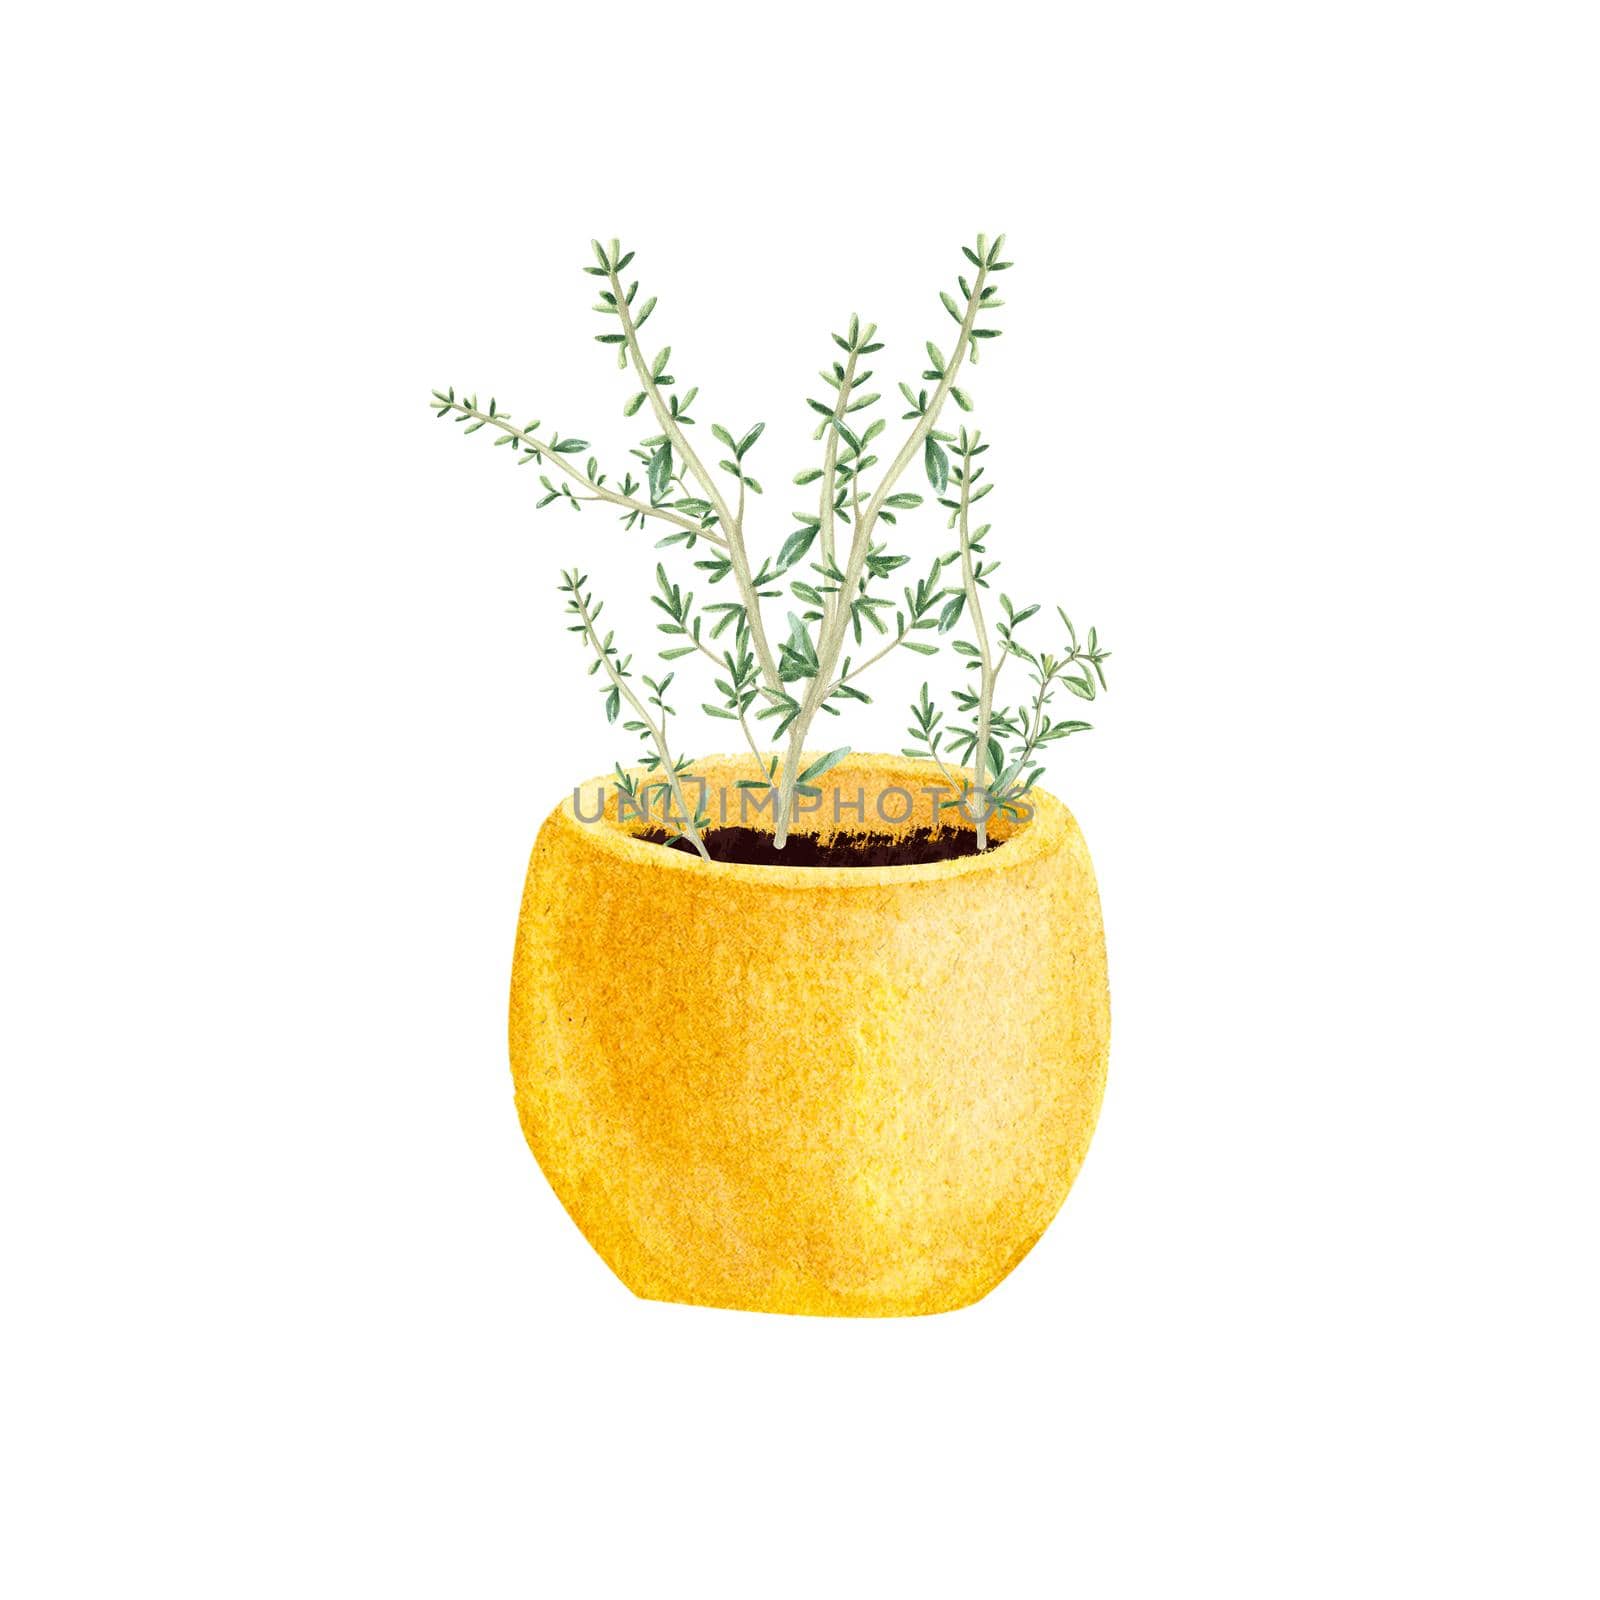 Thyme in a pot isolated on a white background. Provencal herbs in watercolor. Illustration of kitchen herbs and spices. Suitable for postcards, business cards, banners, booklets, design, textiles.